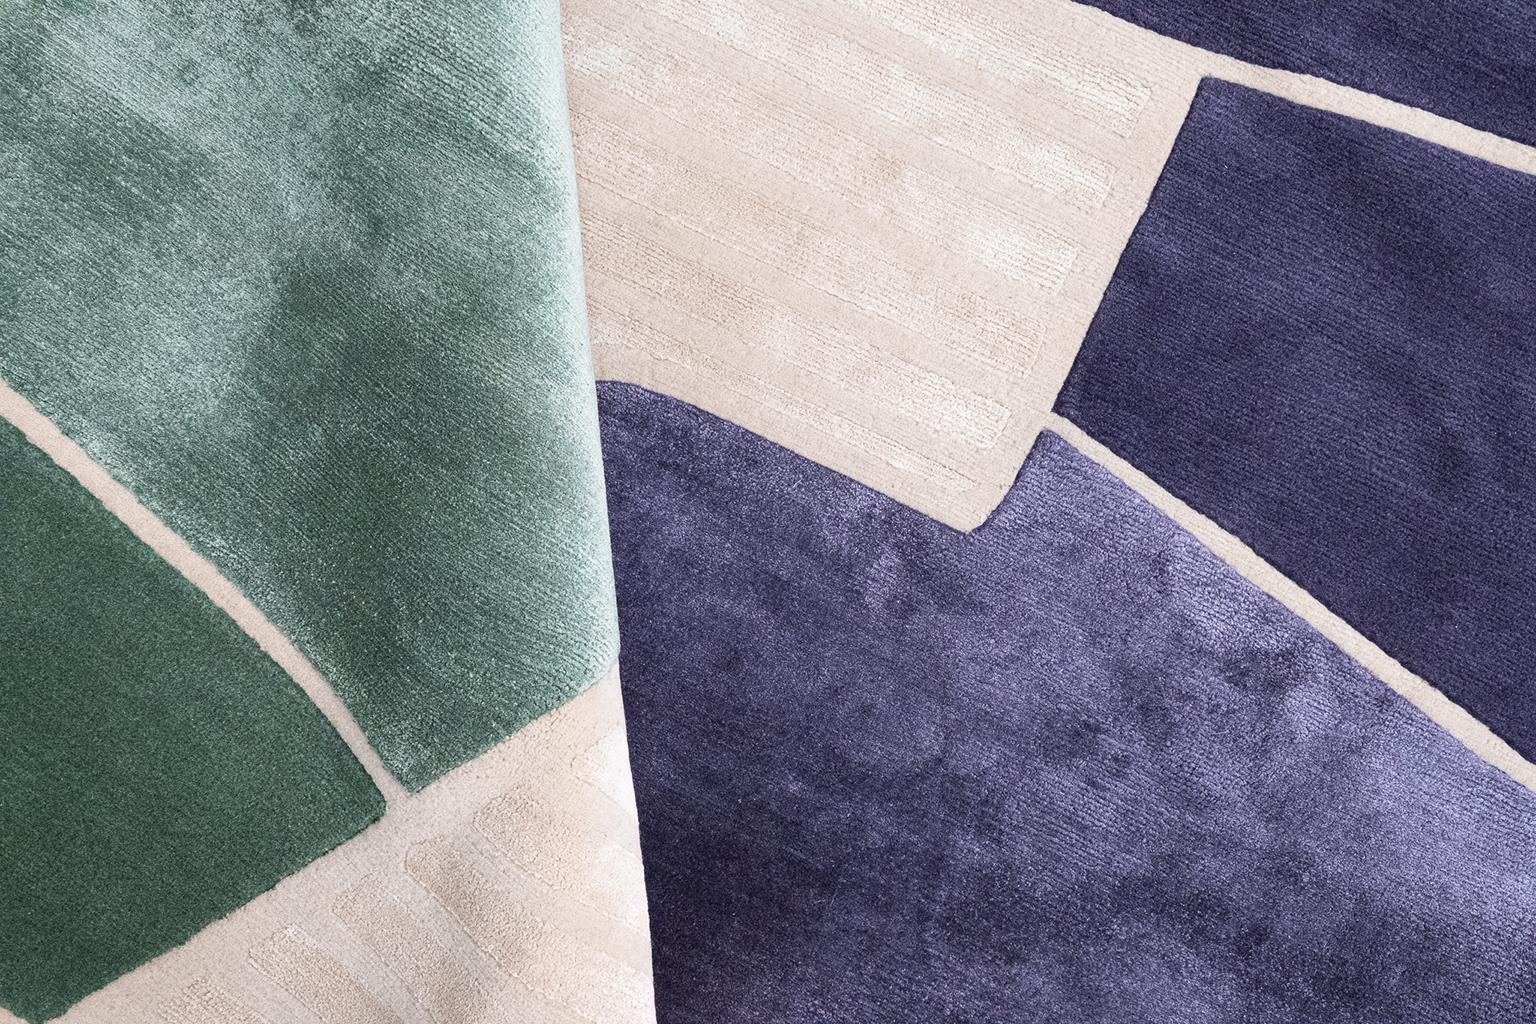 Ambiance is an experimental, graphic collection, which serves as the aesthetic core of our brand. Presenting contemporary designs and compositions inspired by urban architecture, each rug is completed in wool and silk using up-to-date and nuanced